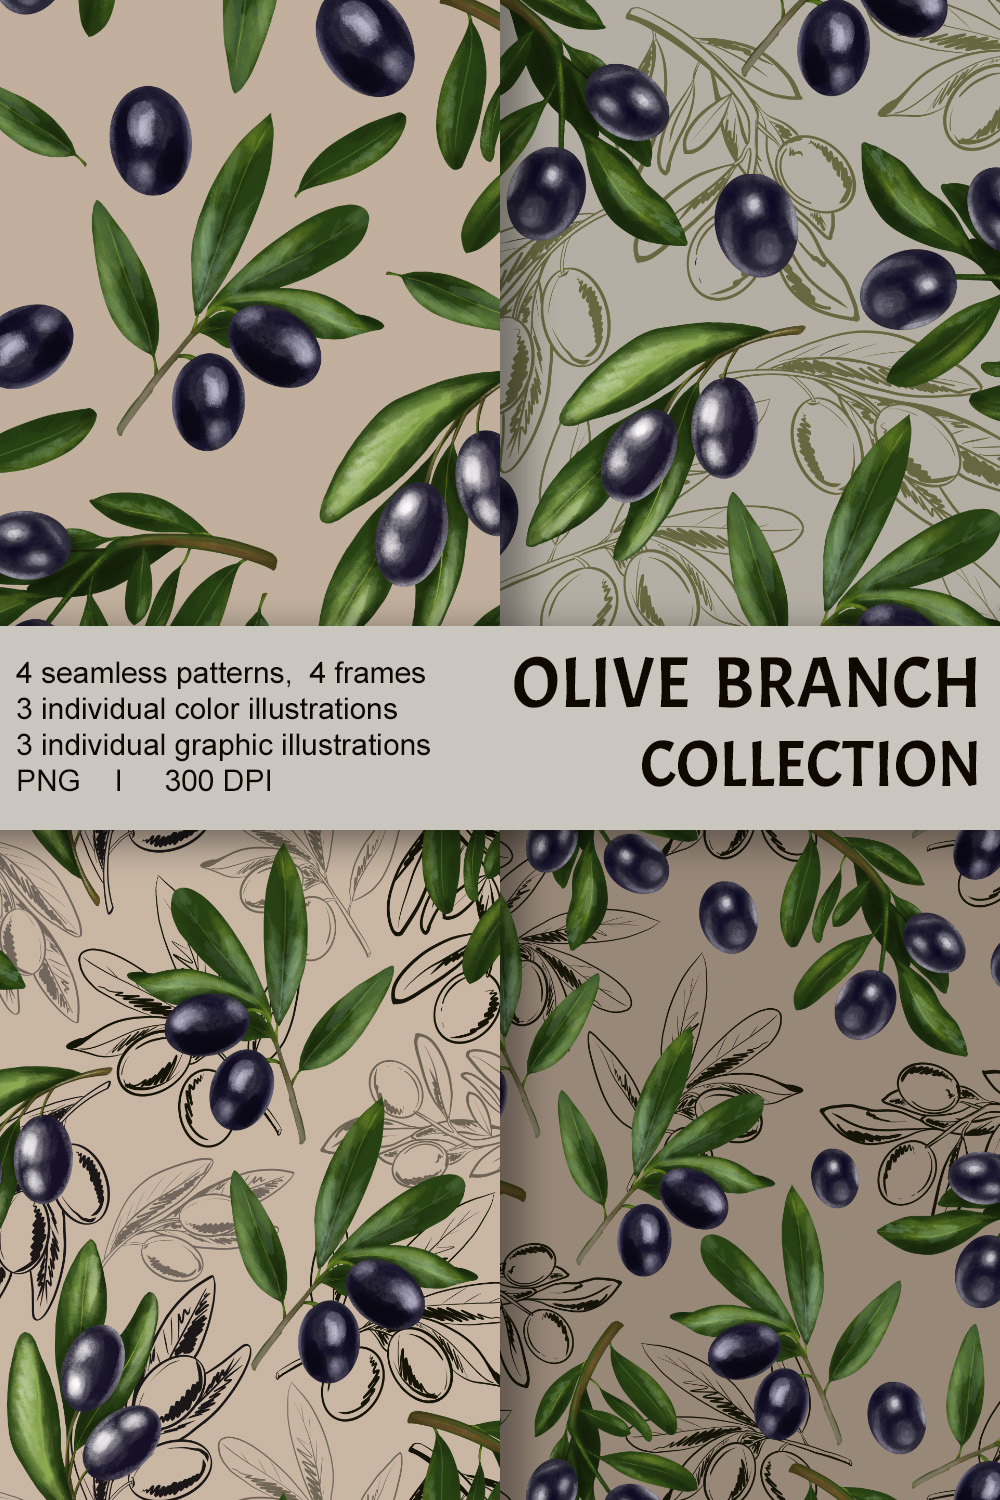 Olive branch collection pinterest preview image.